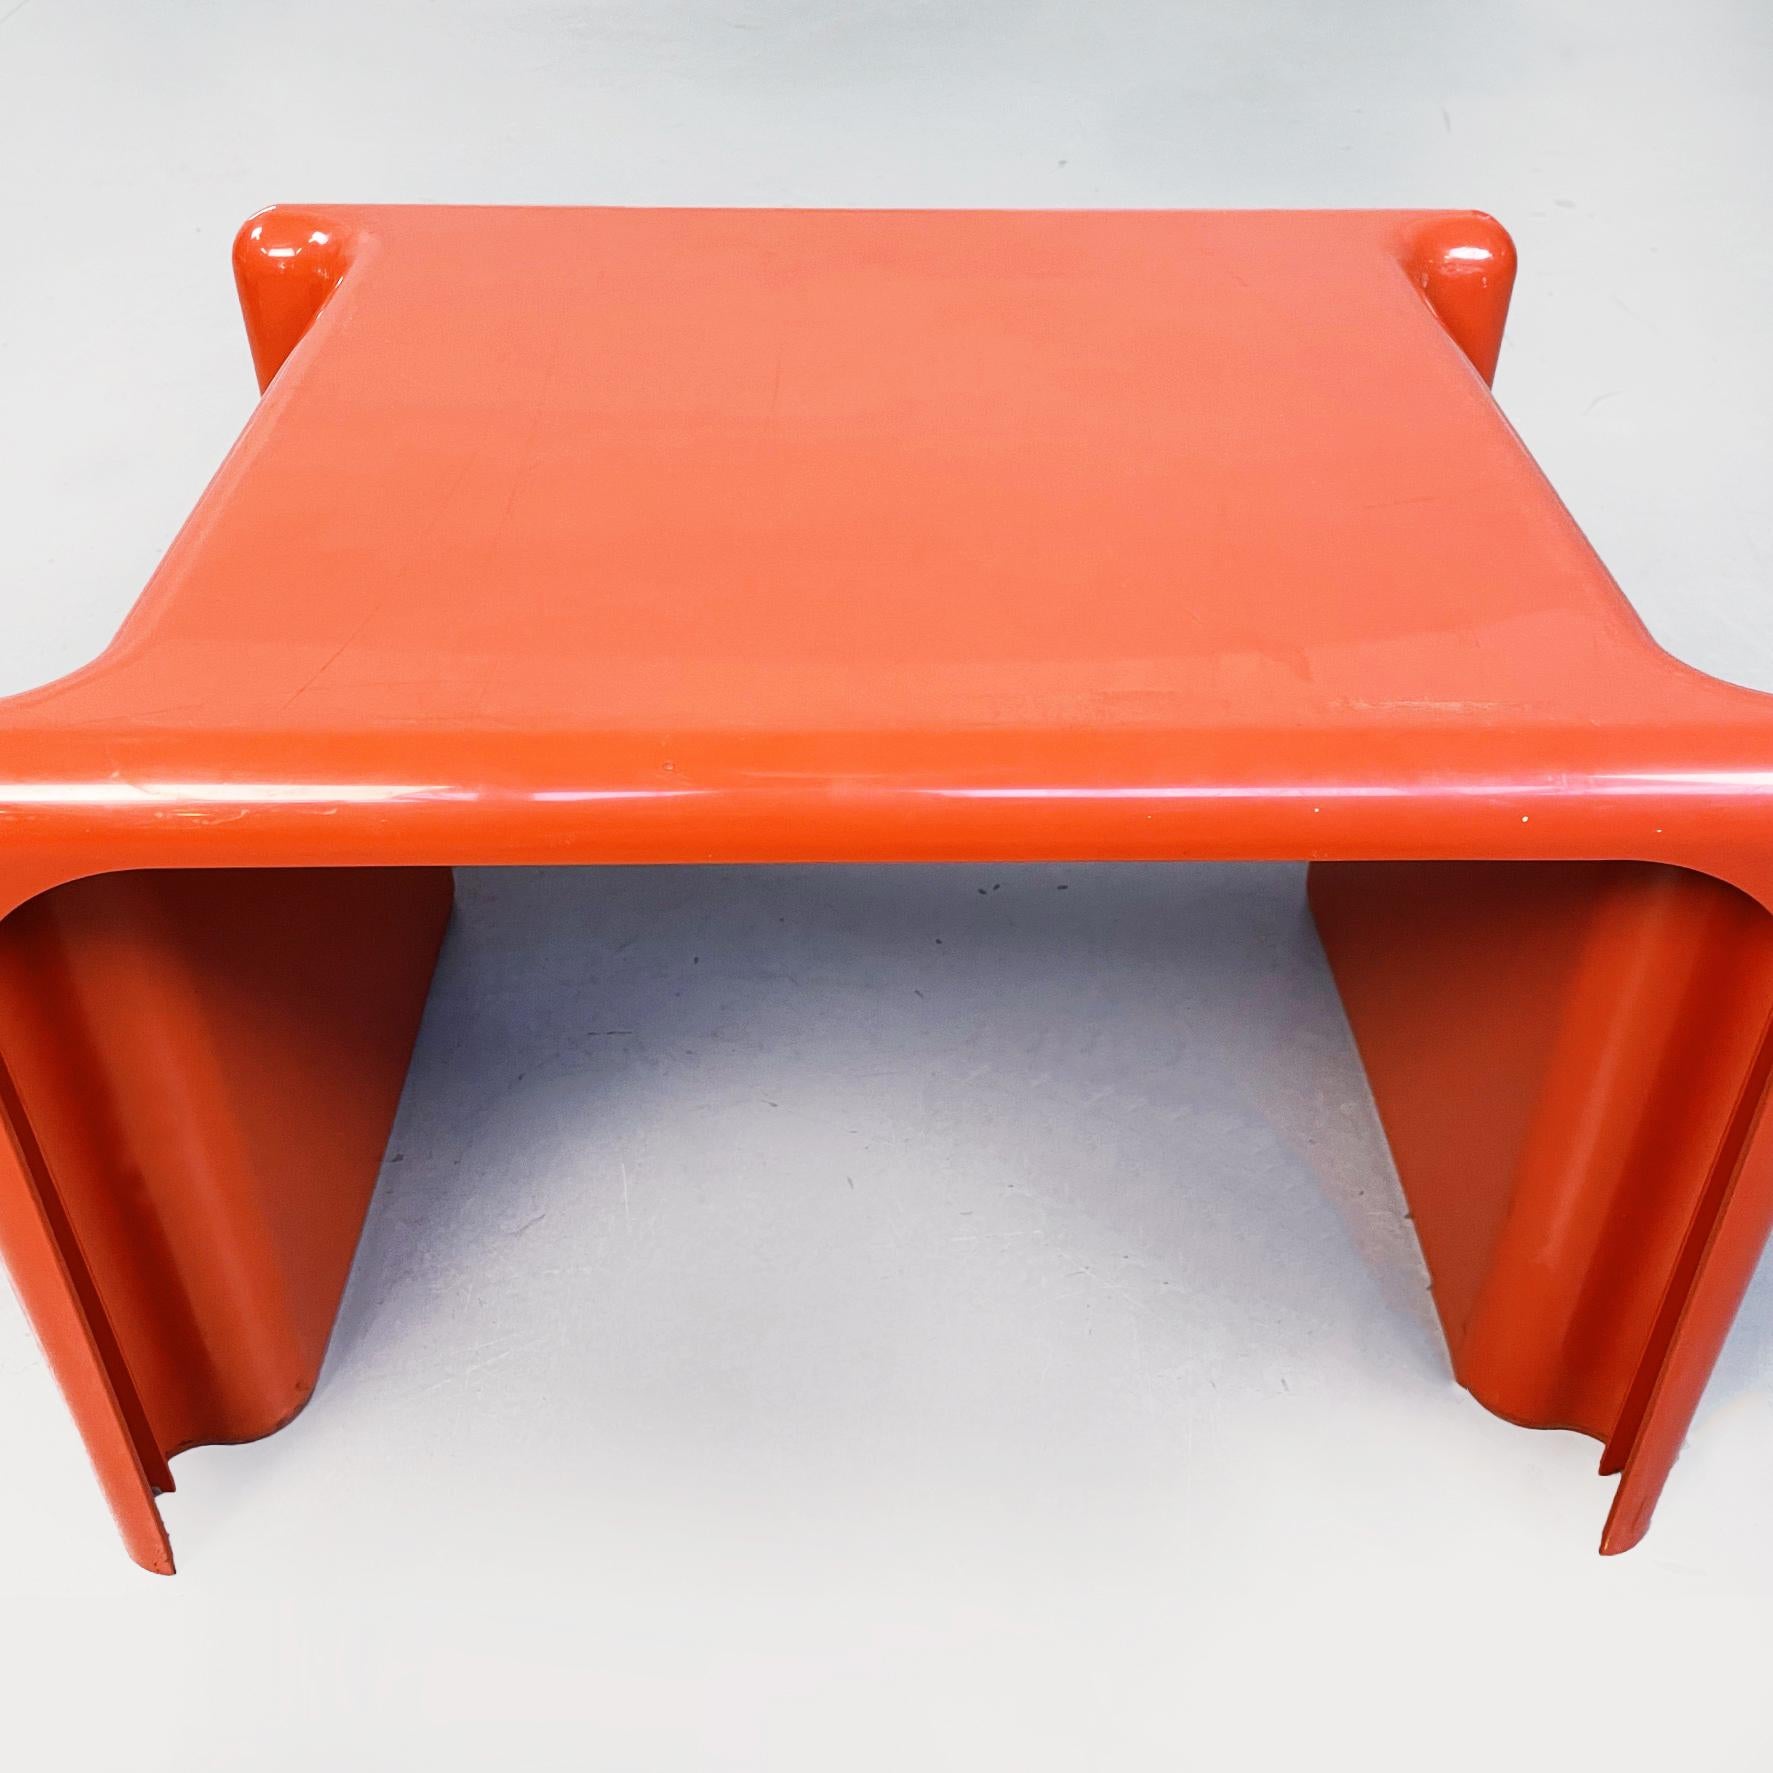 Italian Mid-Century Plastic Scagno Coffee Tables by Stoppino Elco Scorze, 1970s For Sale 13